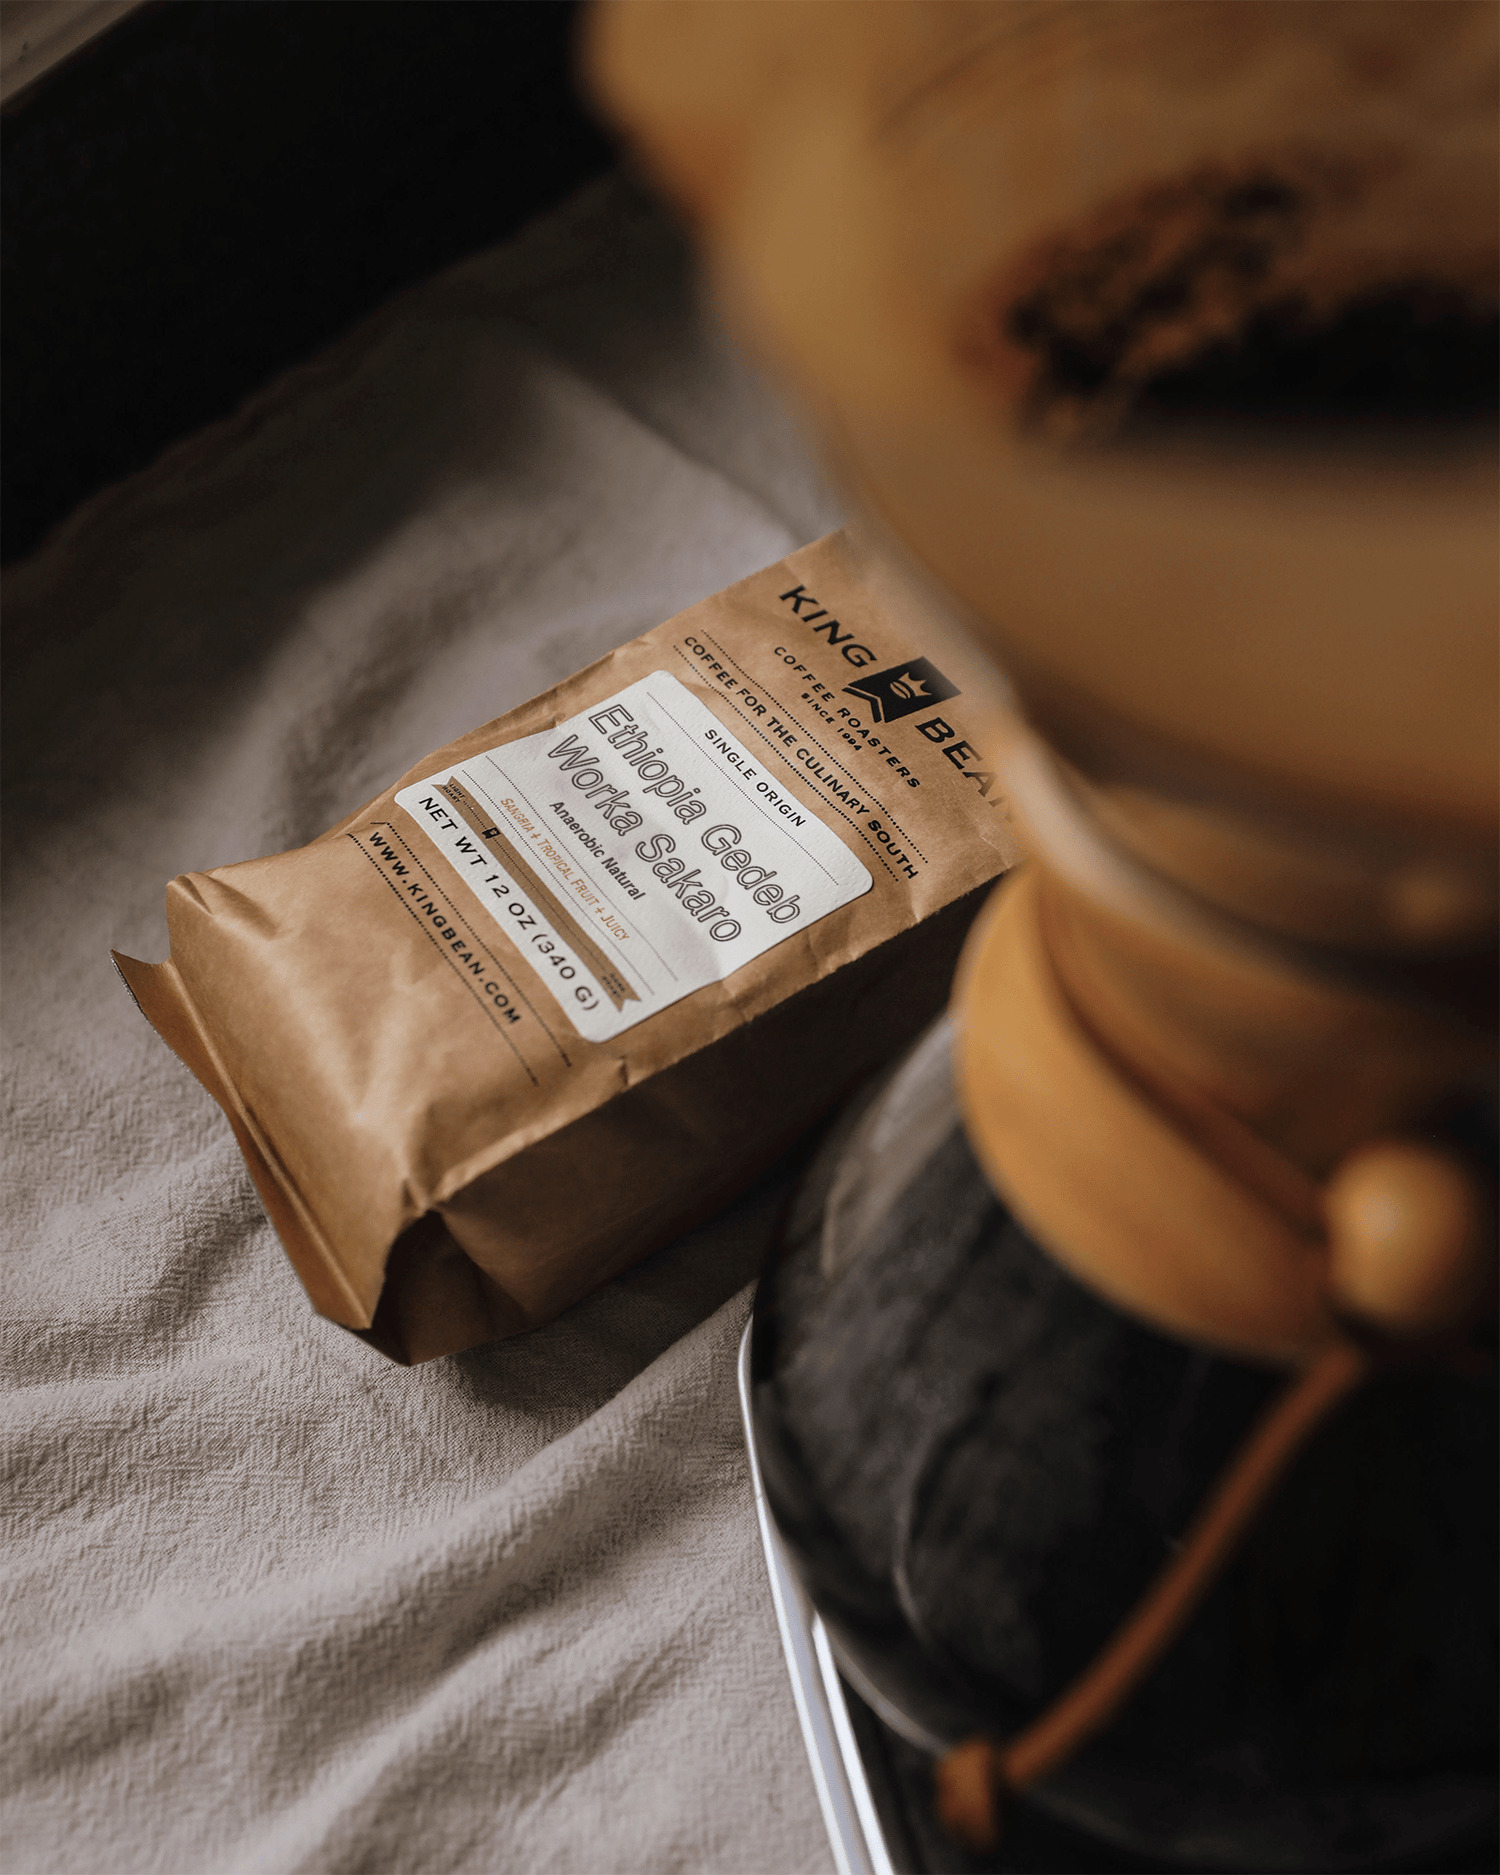 a photo of a bag of eithiopia gedeb coffee